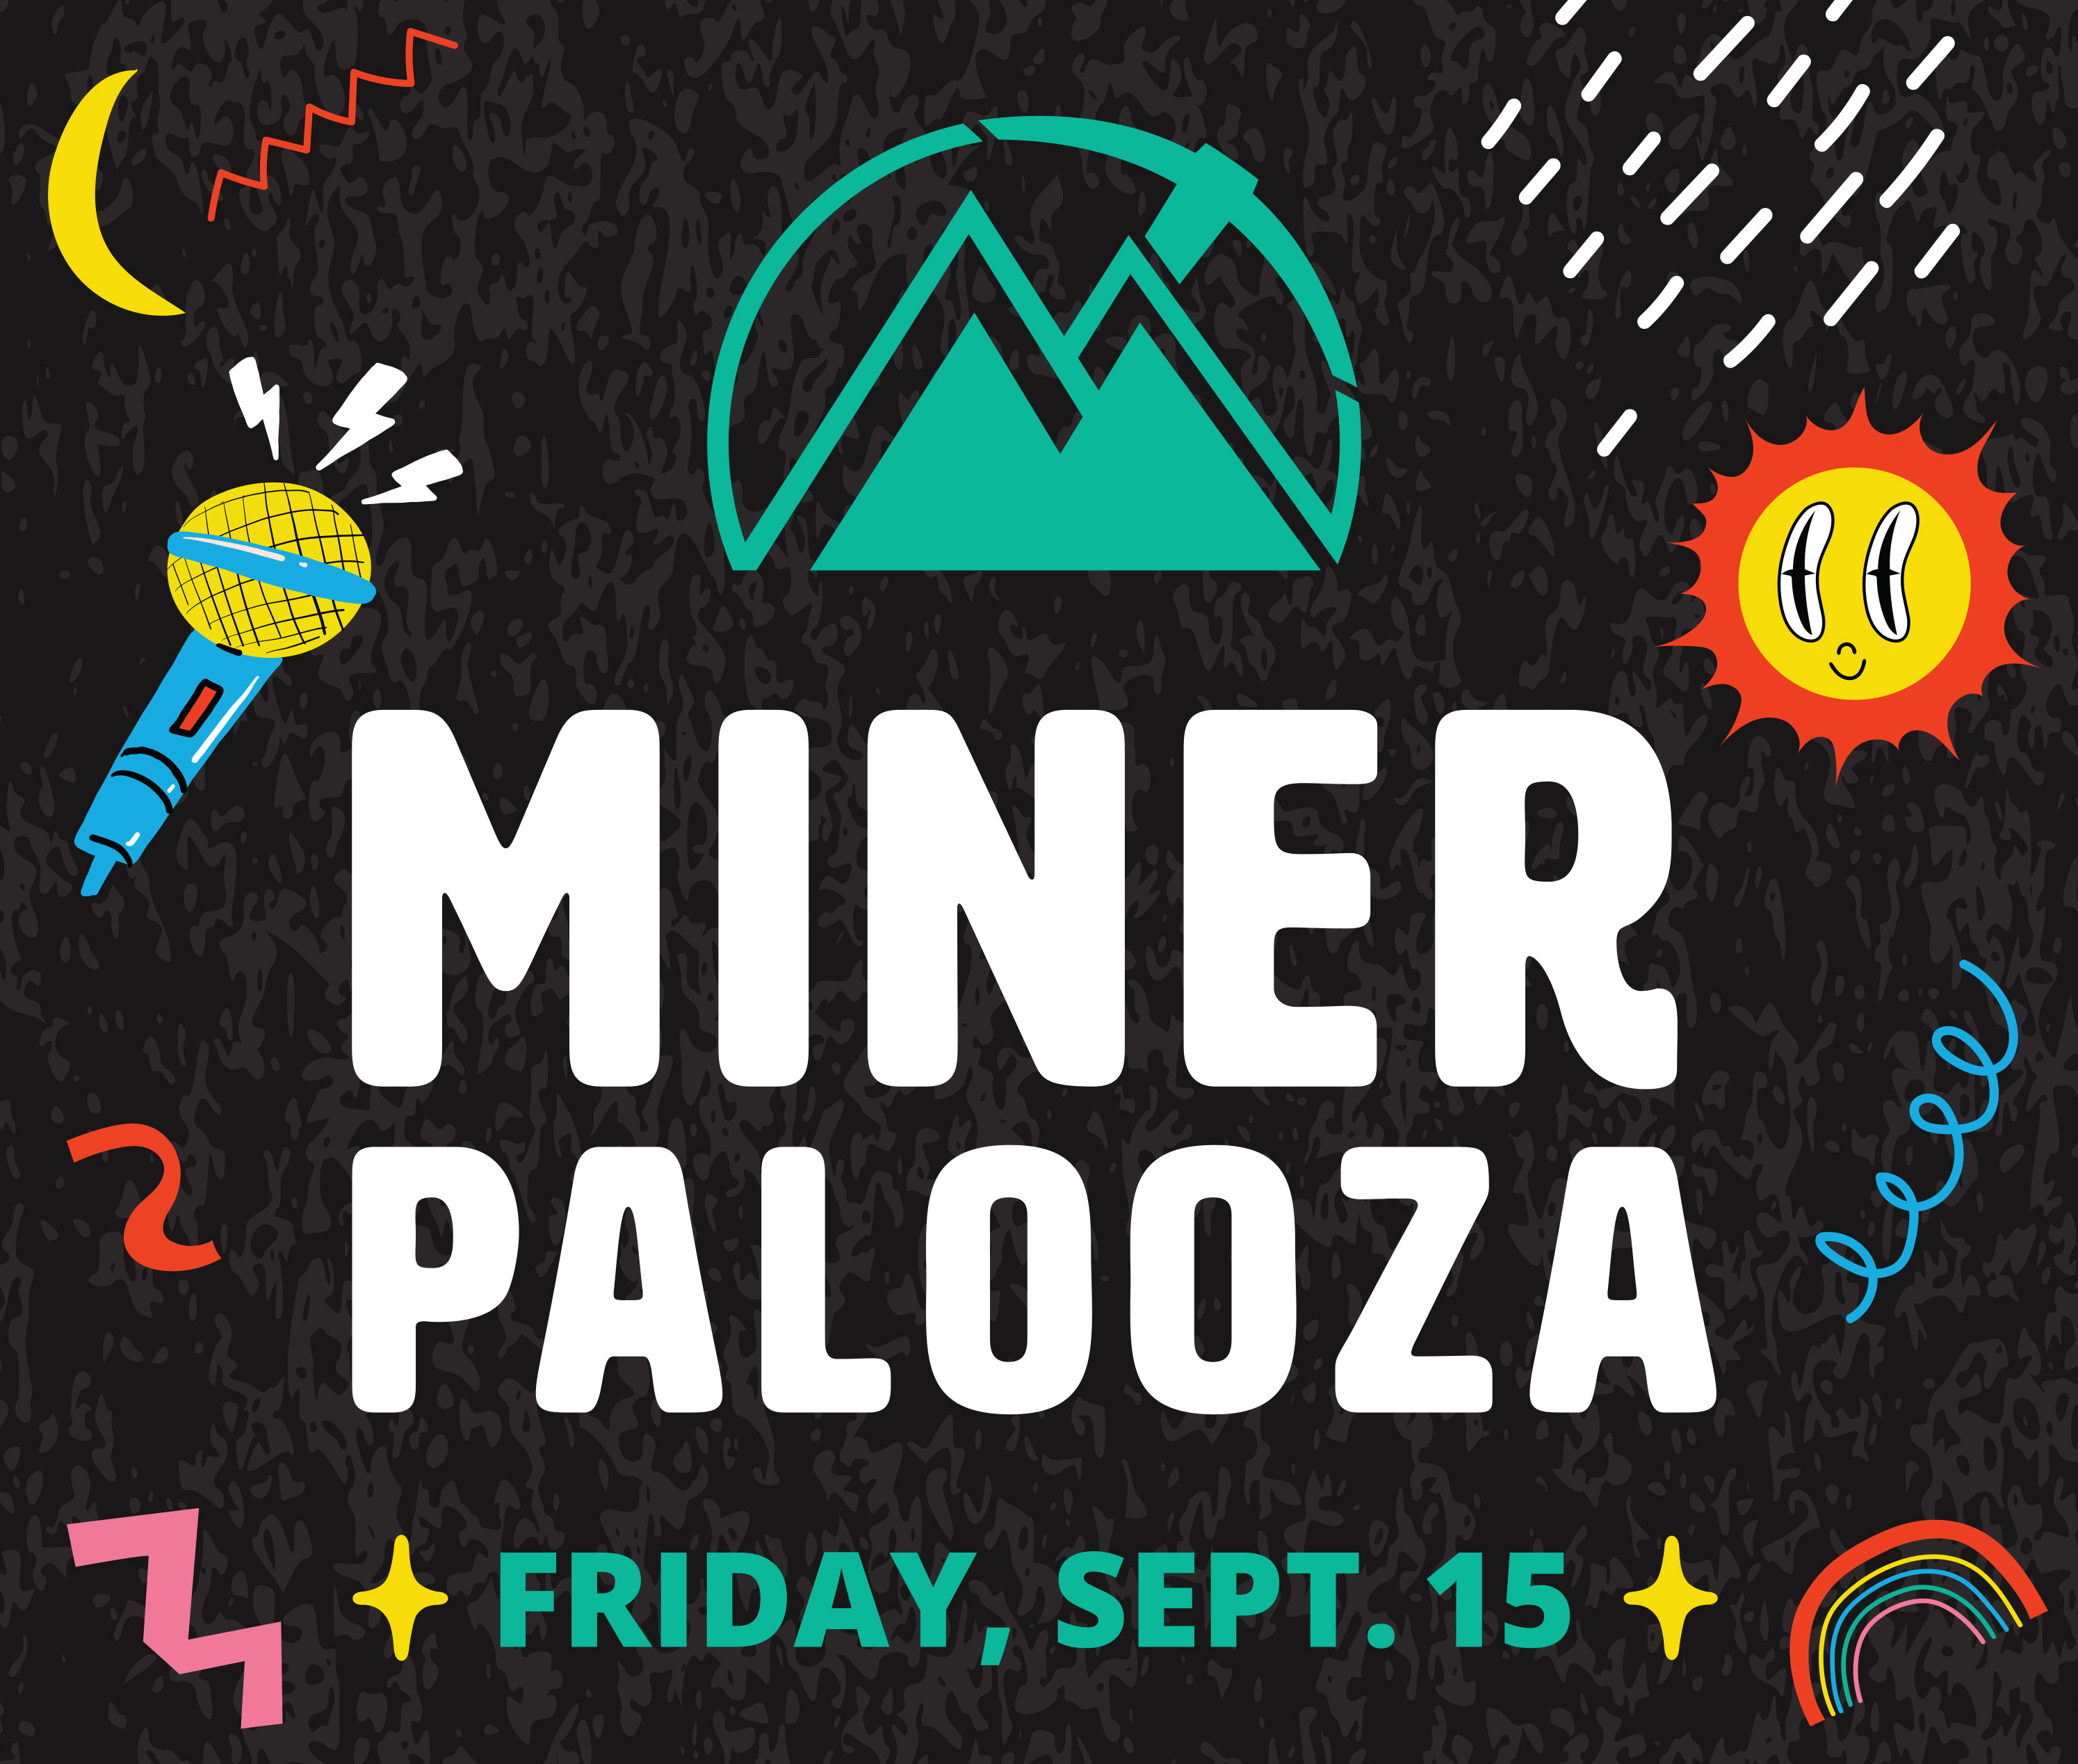 Minerpalooza 鈥� one of the signature events for The 缅北轮奸 of Texas at El Paso and the El Paso community 鈥� will return to the UTEP campus Friday, Sept. 15. The annual celebration to kick off the academic year will take place from 6 to 11:30 p.m. Admission is free and open to the public.  